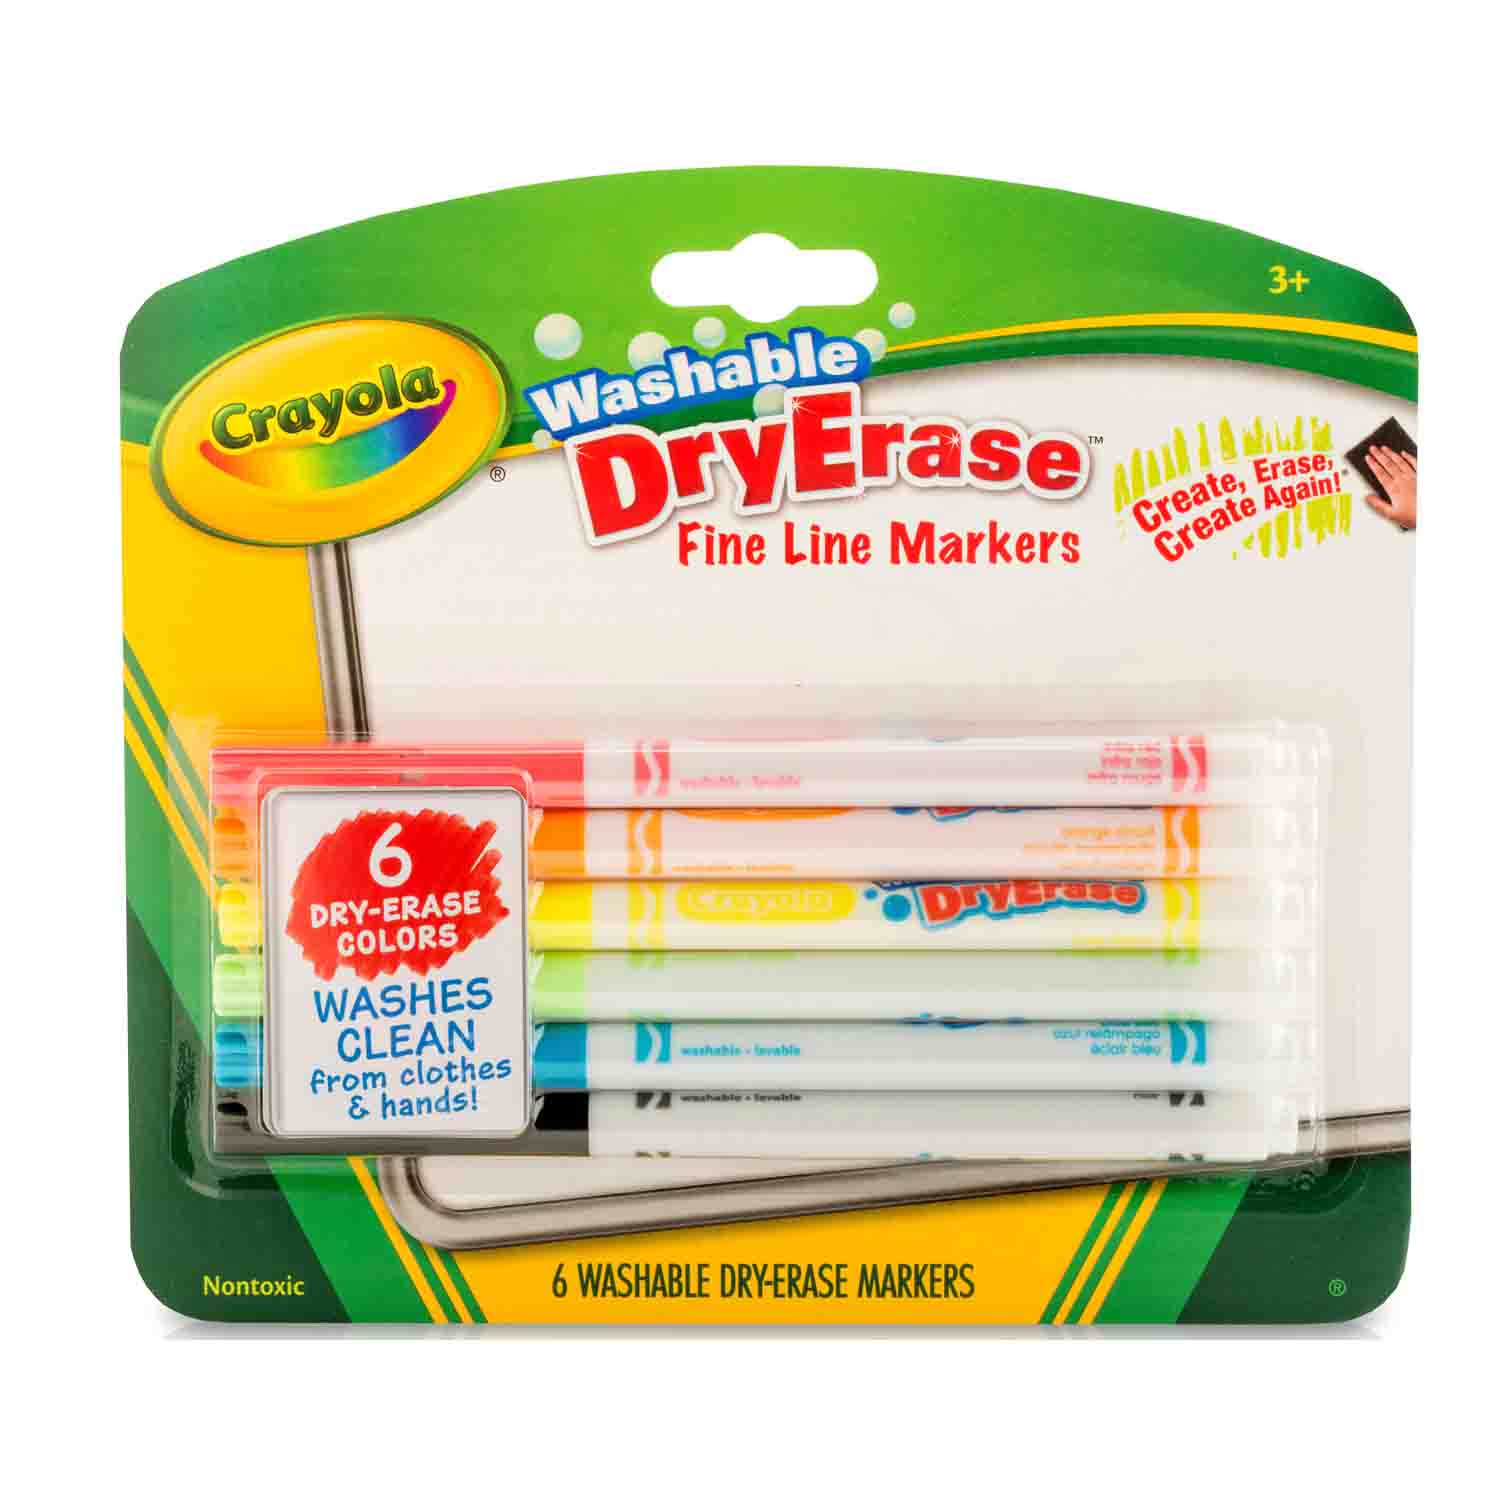 Crayola 586545 Take Note 12-Count 8 Assorted Color Chisel Tip Dry Erase  Markers